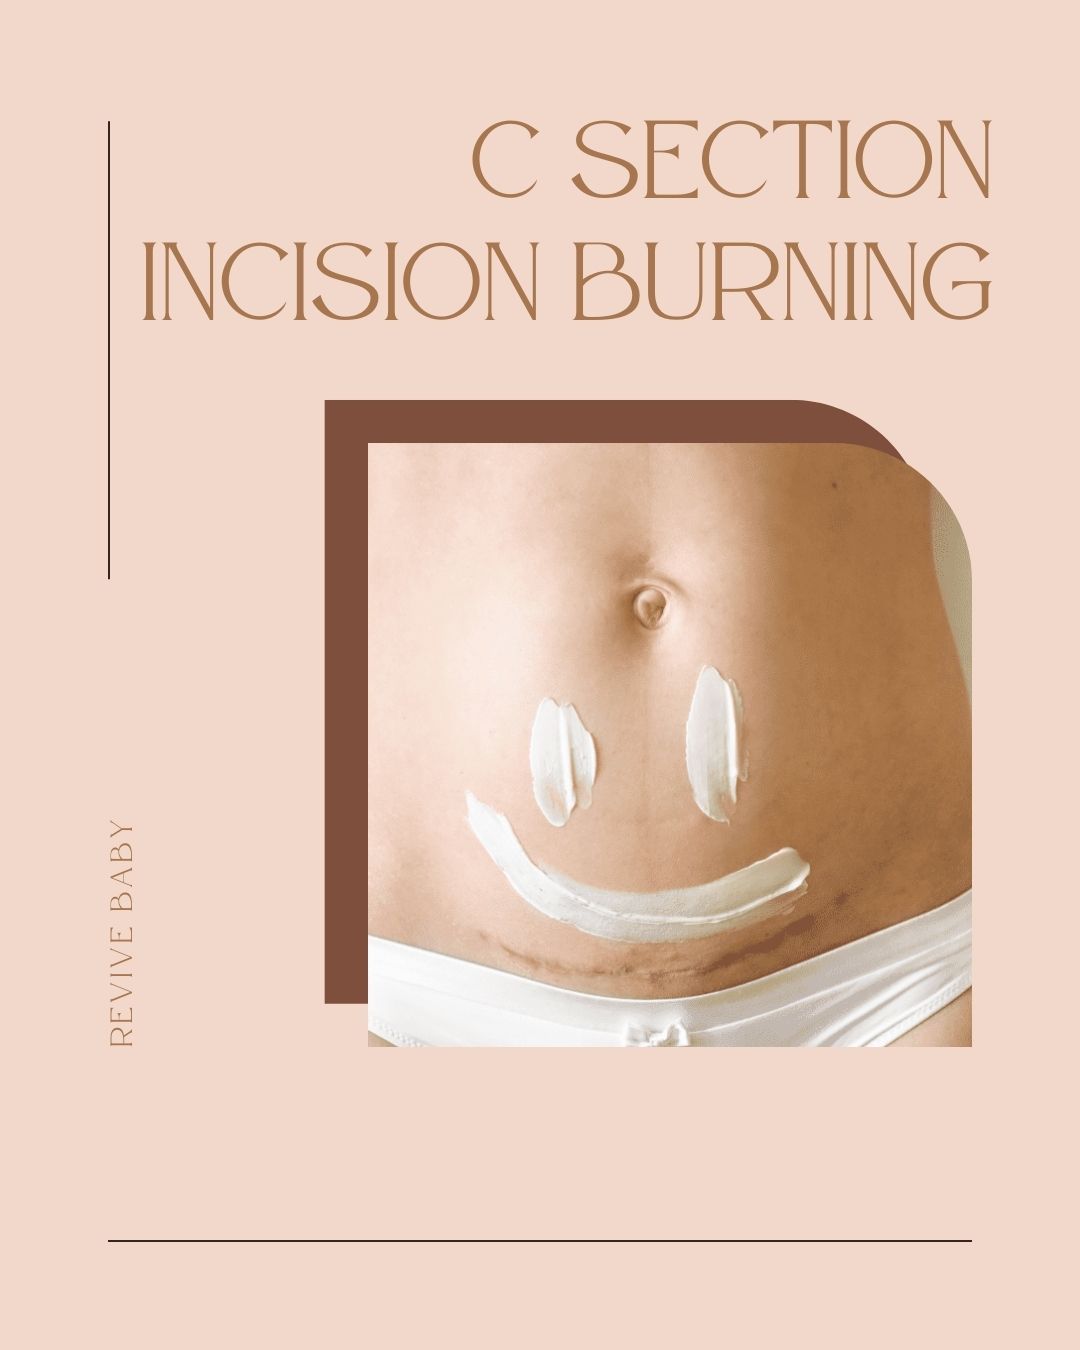 C Section Incision Burning